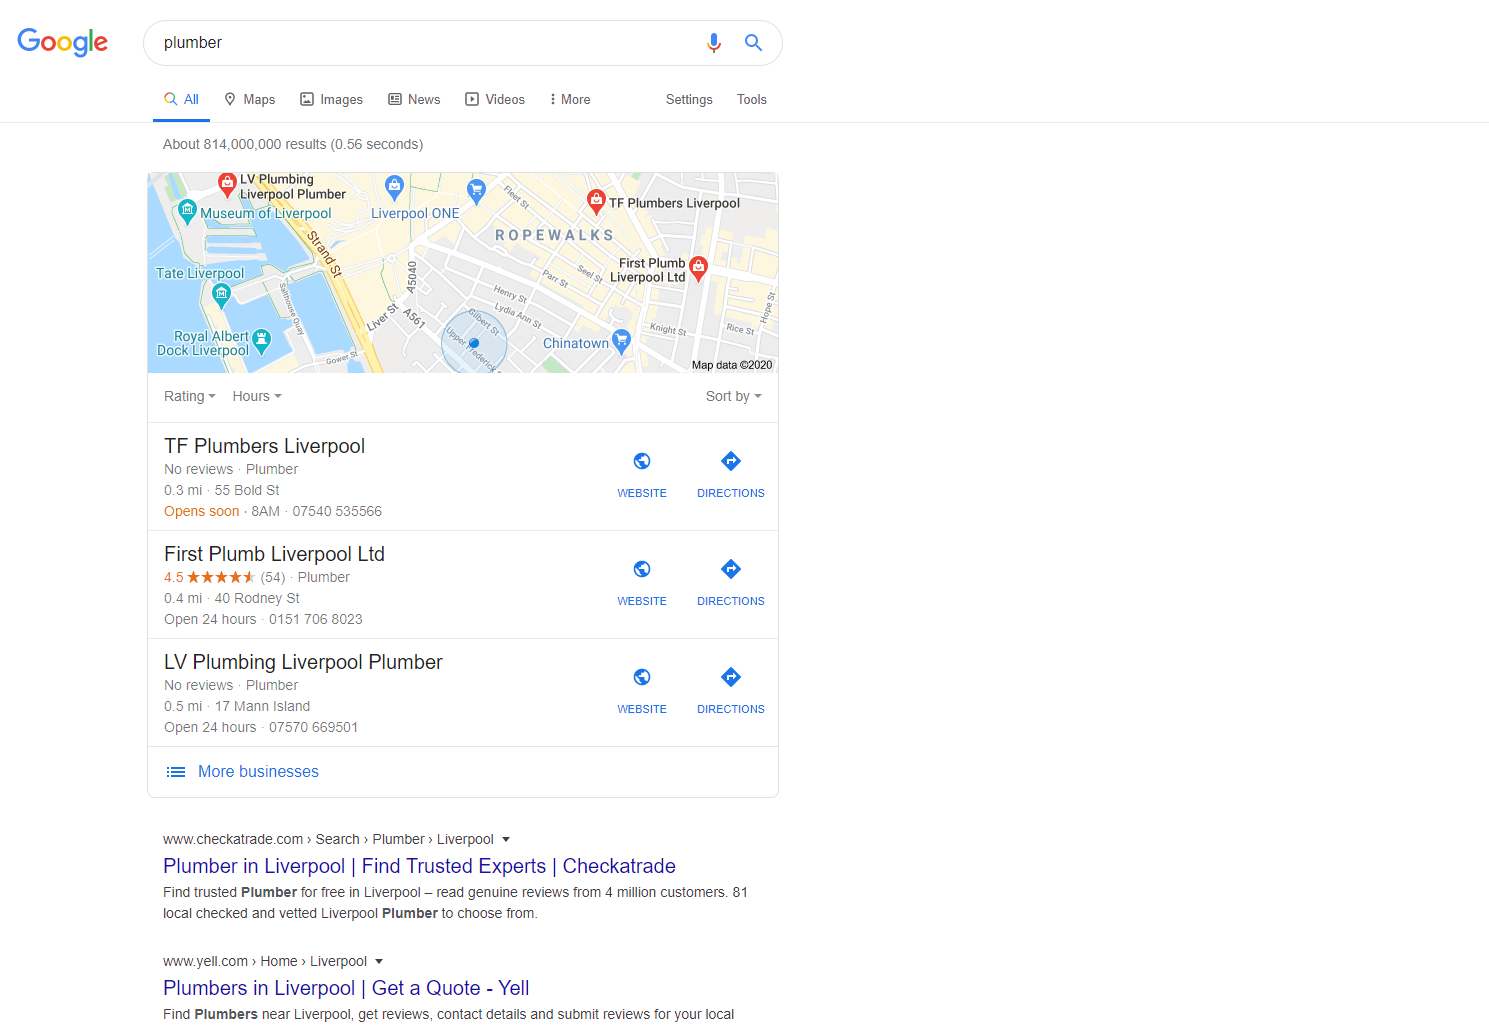 Search engine result for plumber in Liverpool